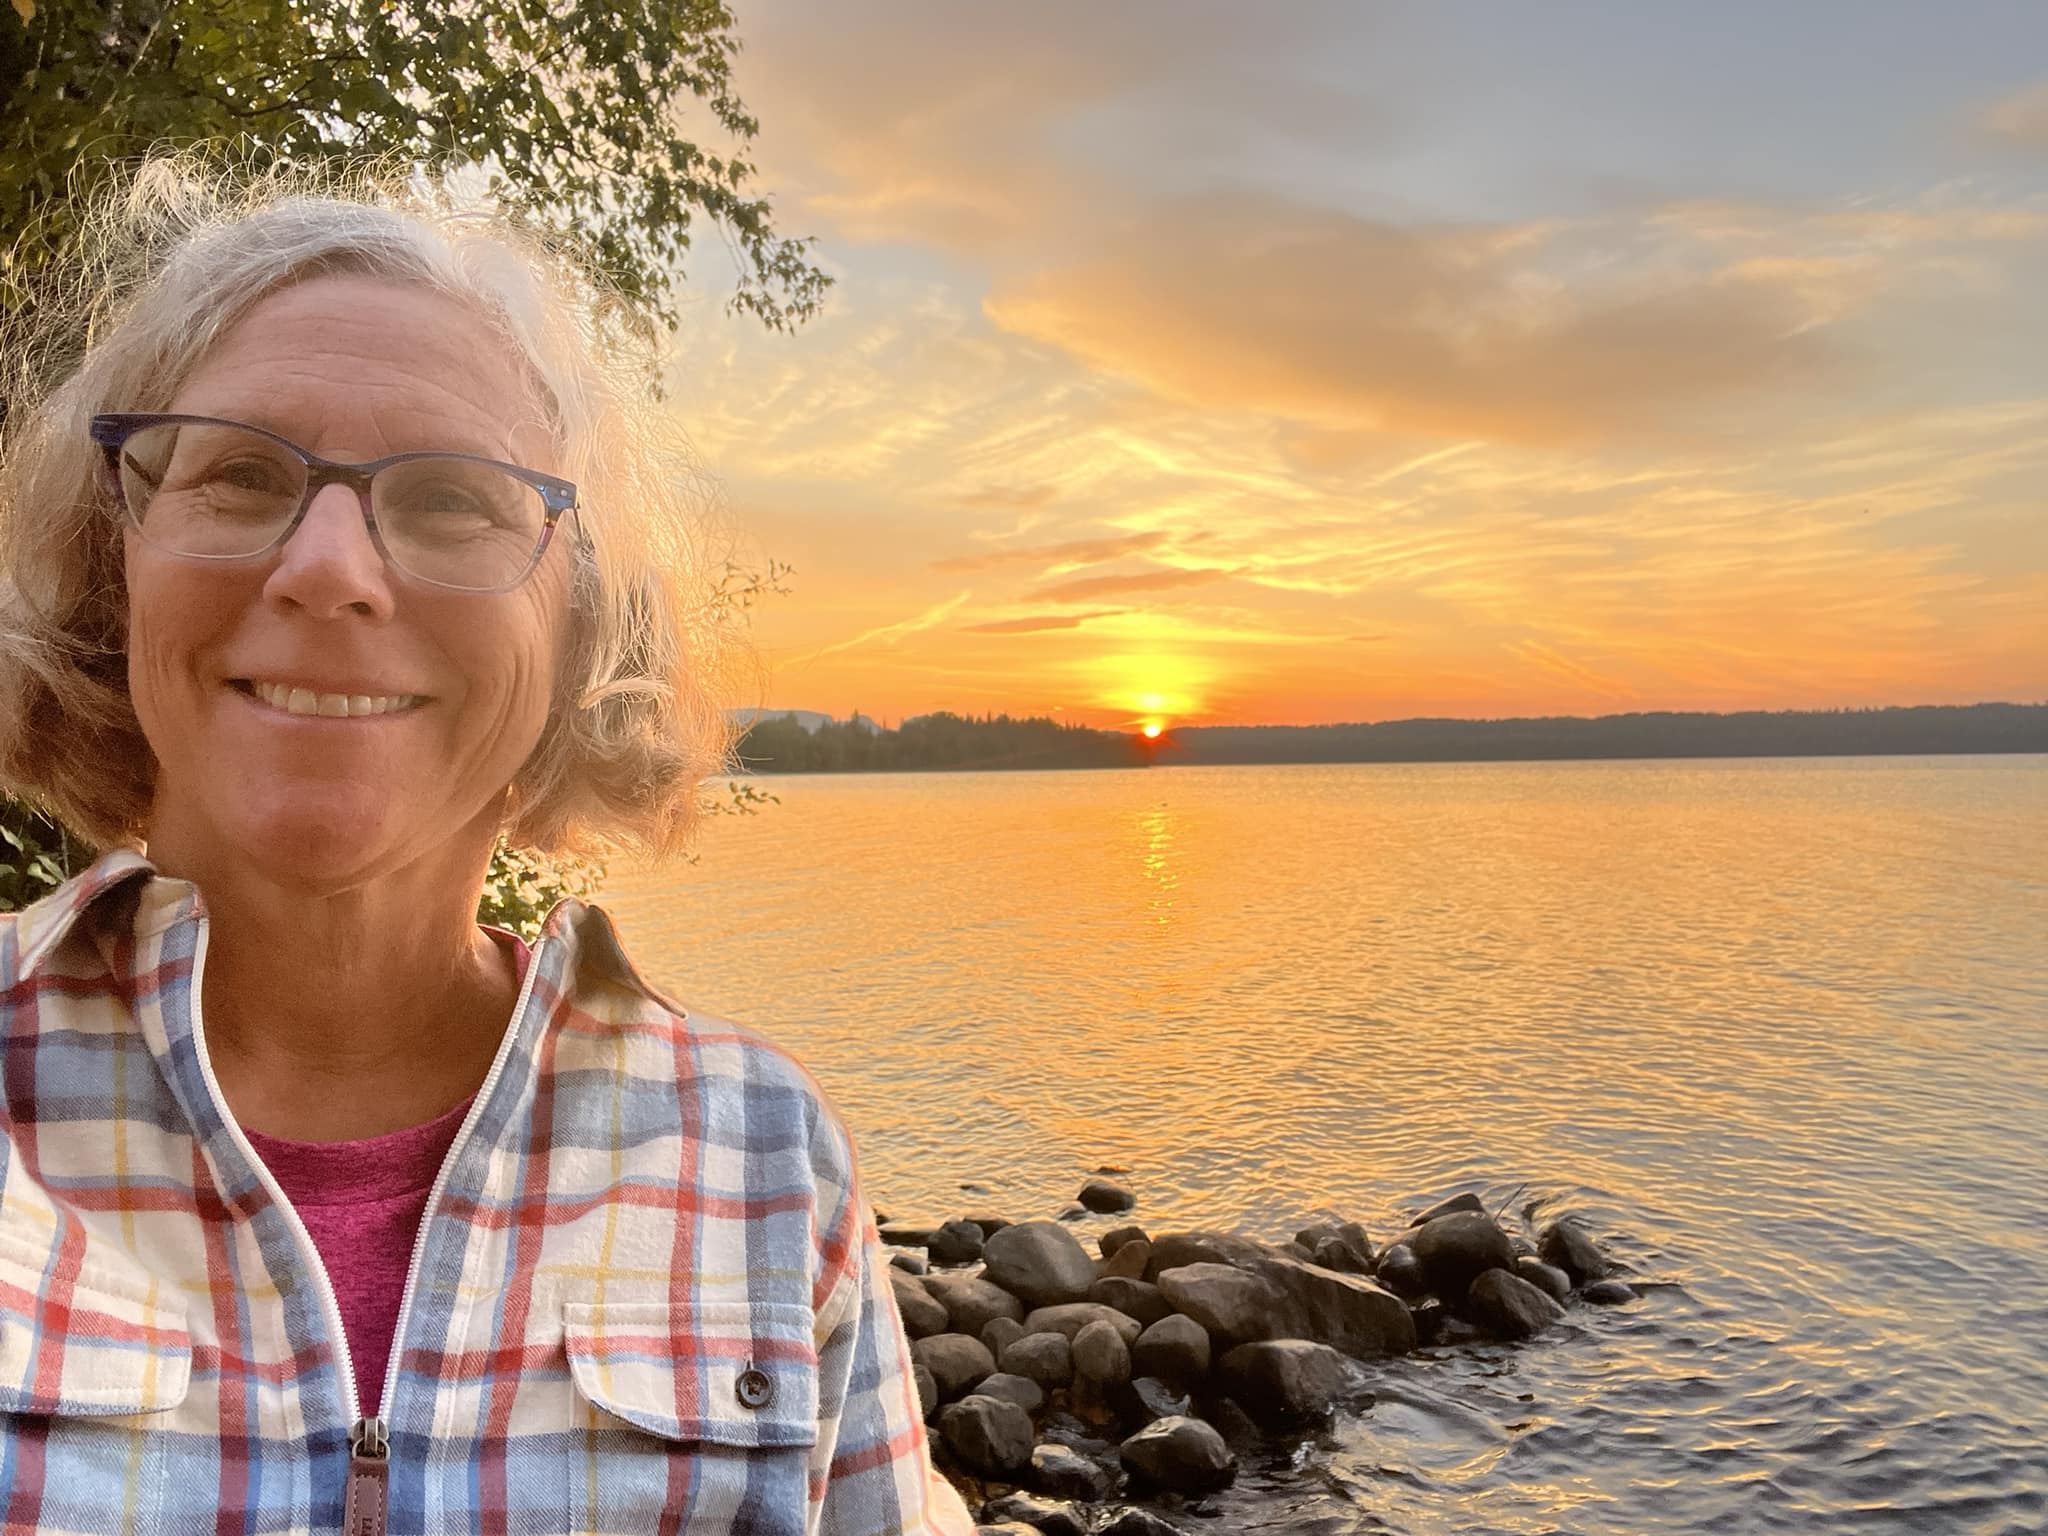 Laura MacGregor, smiling on a lakeshore in front of a beautiful orange sunset over the water.